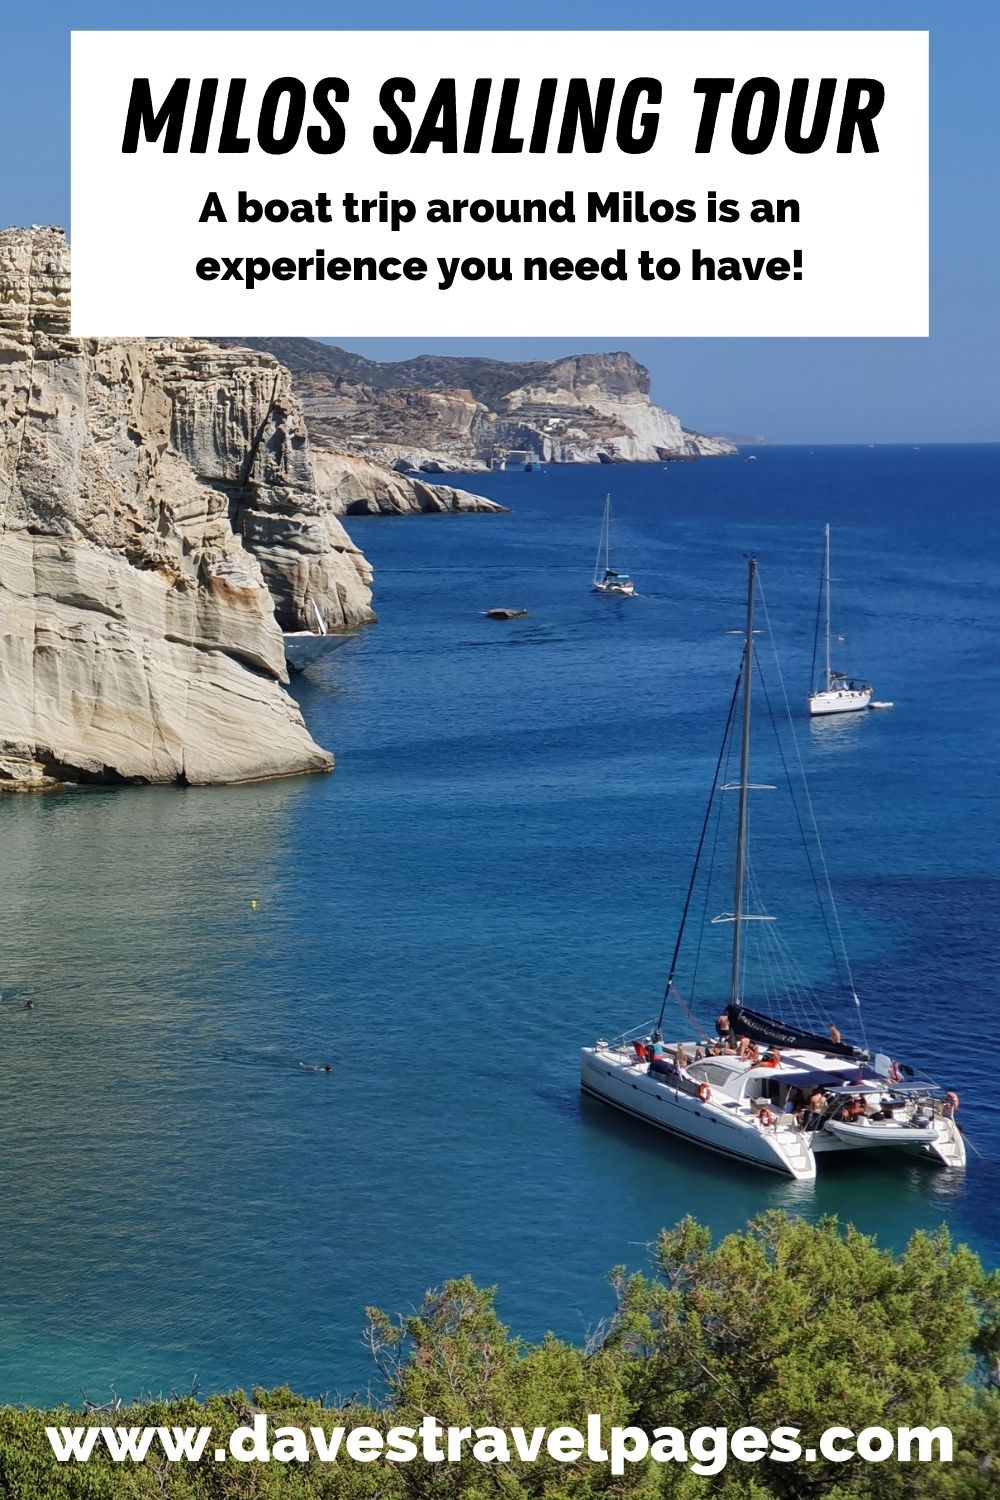 A catamaran cruise around the Greek island of Milos is a once in a lifetime experience!